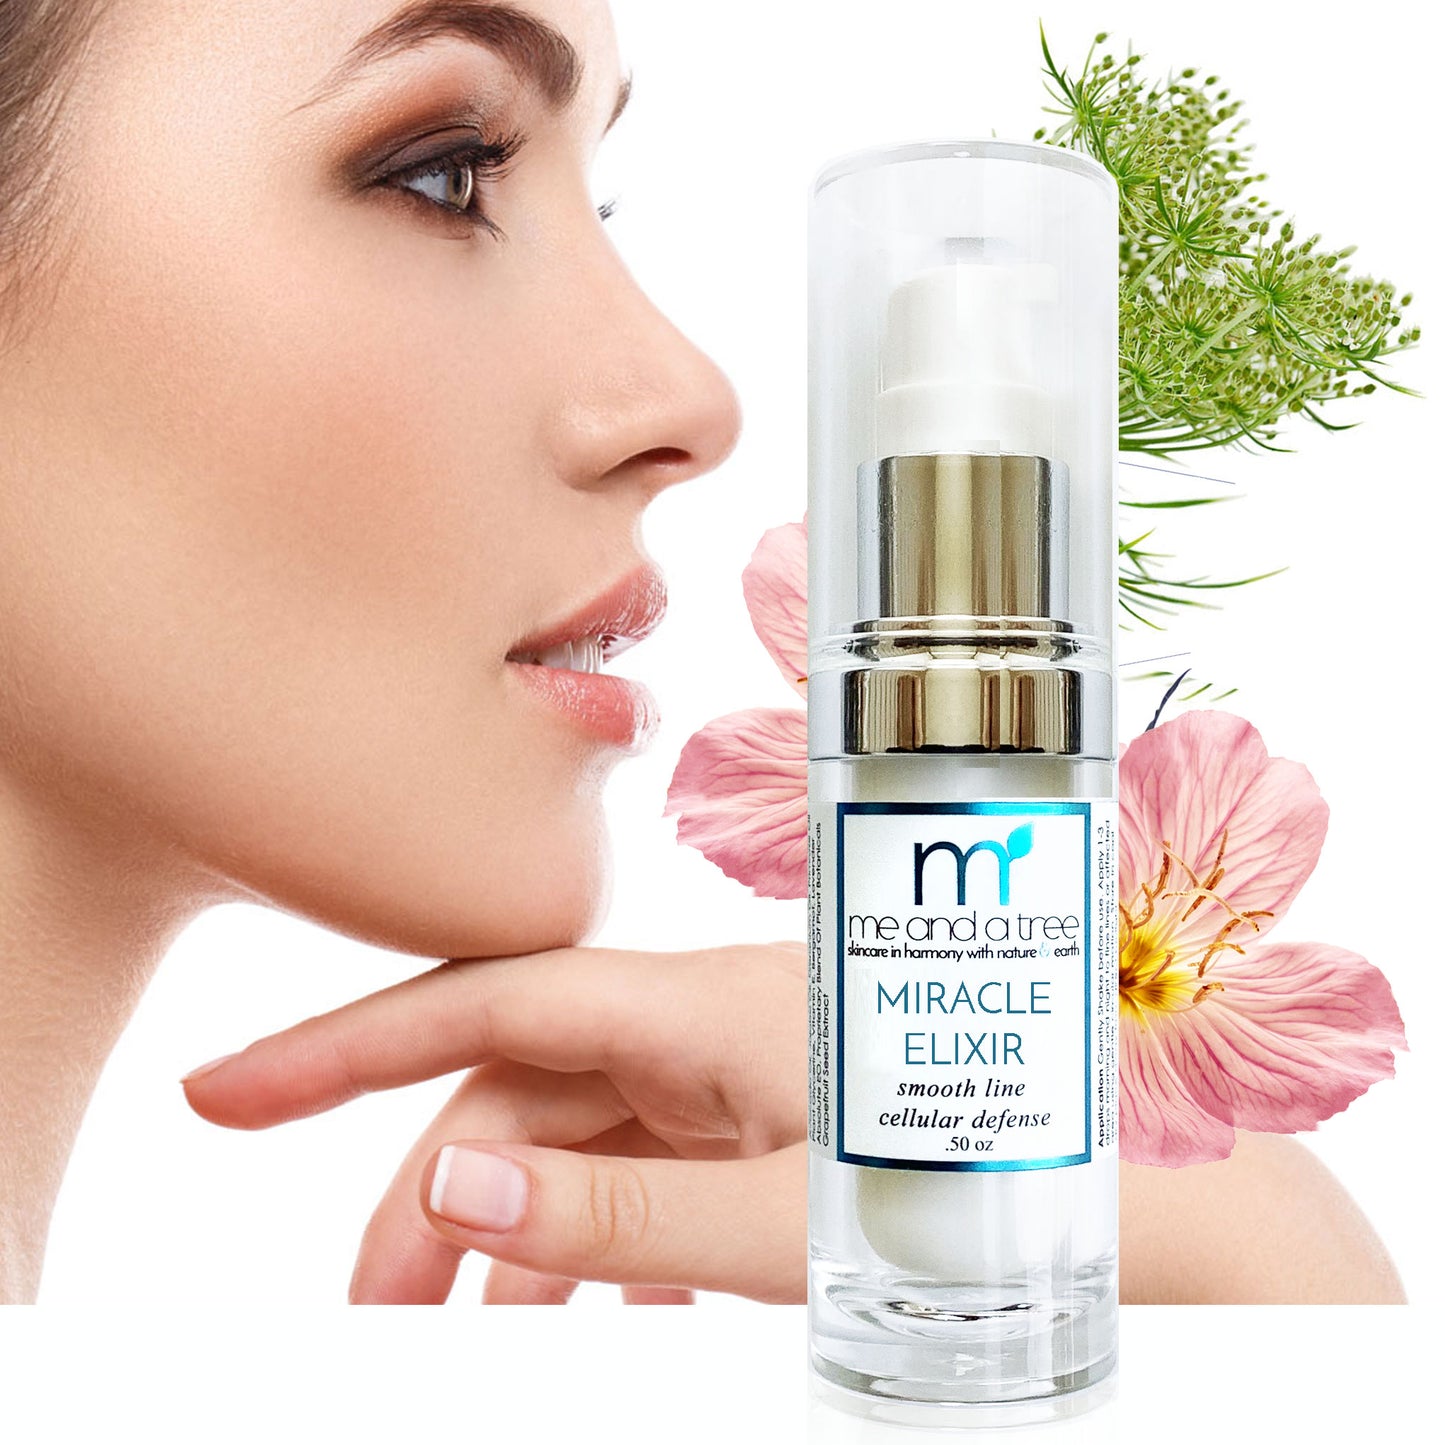 Image of a beautiful woman with flawless skin using Miracle Elixir natural face skin care serum with tamanu and carrot seed oil. The serum is formulated with pure botanical extracts, rich in vitamins and minerals, and is designed to reduce fine lines, wrinkles, dark spots, and skin irritation. Apply twice daily for best results and achieve smooth, youthful-looking skin like the woman in the image